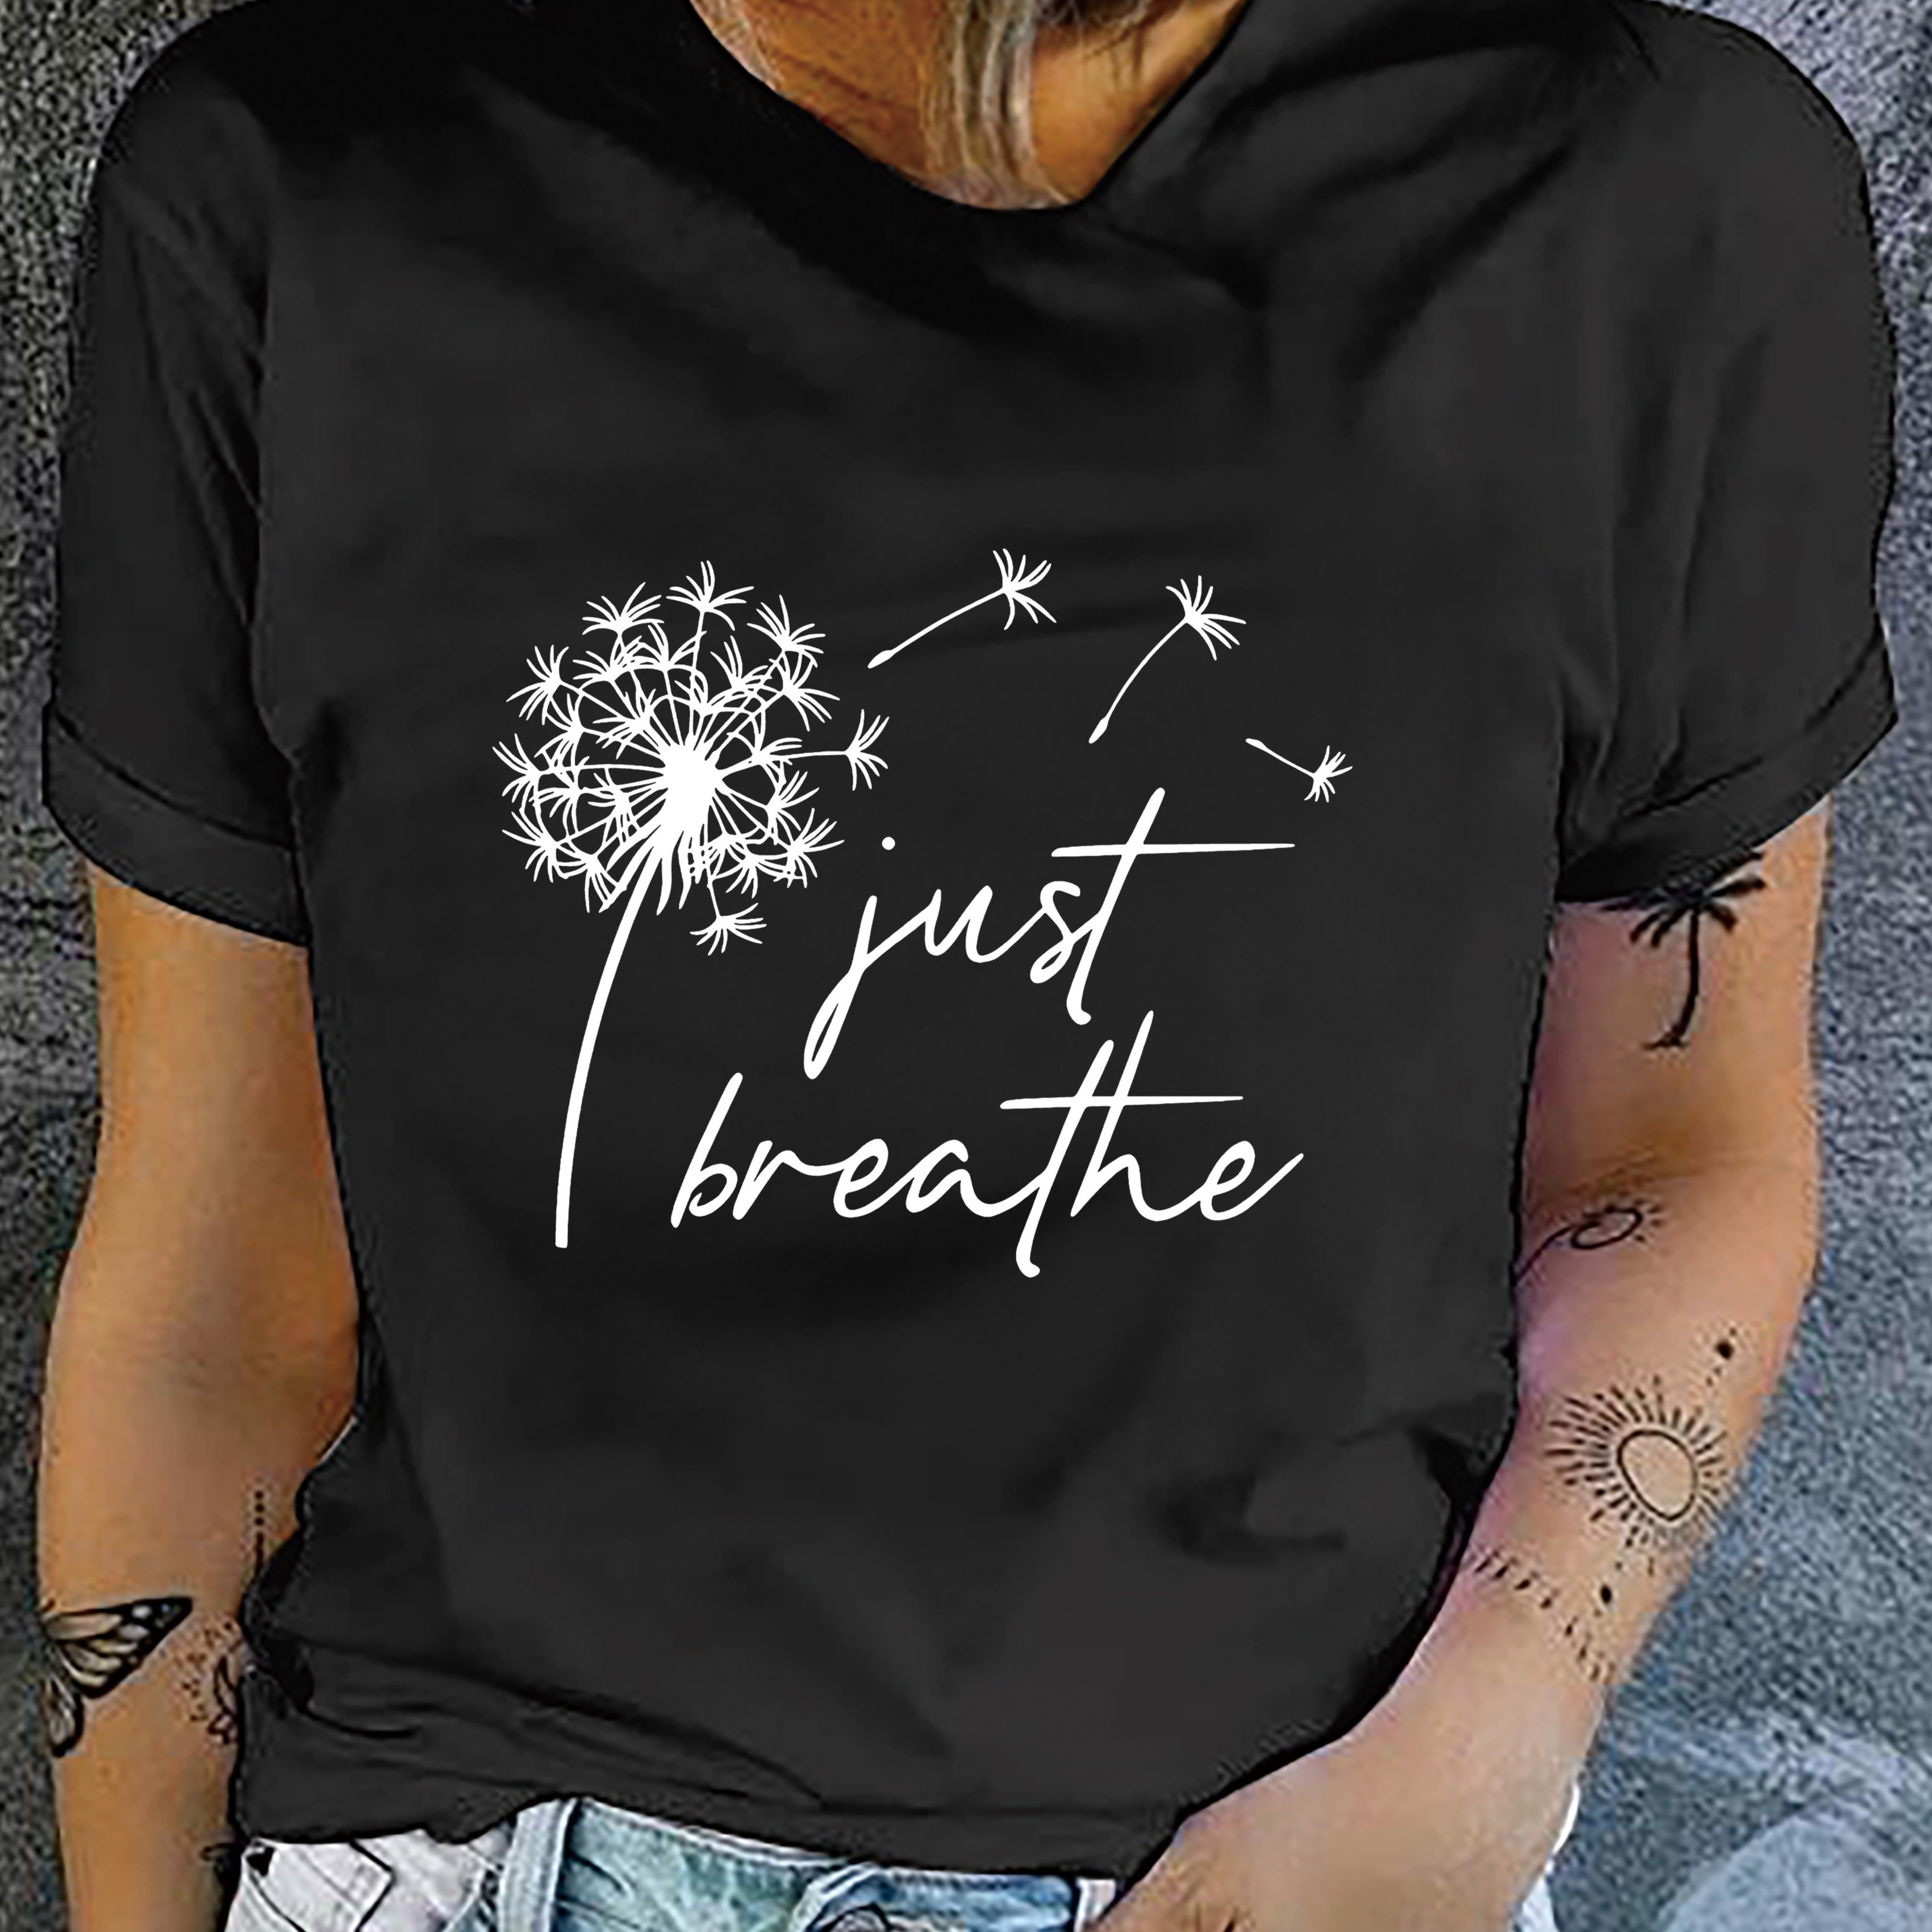 

Dandelion Print Crew Neck T-shirt, Short Sleeve Casual Top For Summer & Spring, Women's Clothing